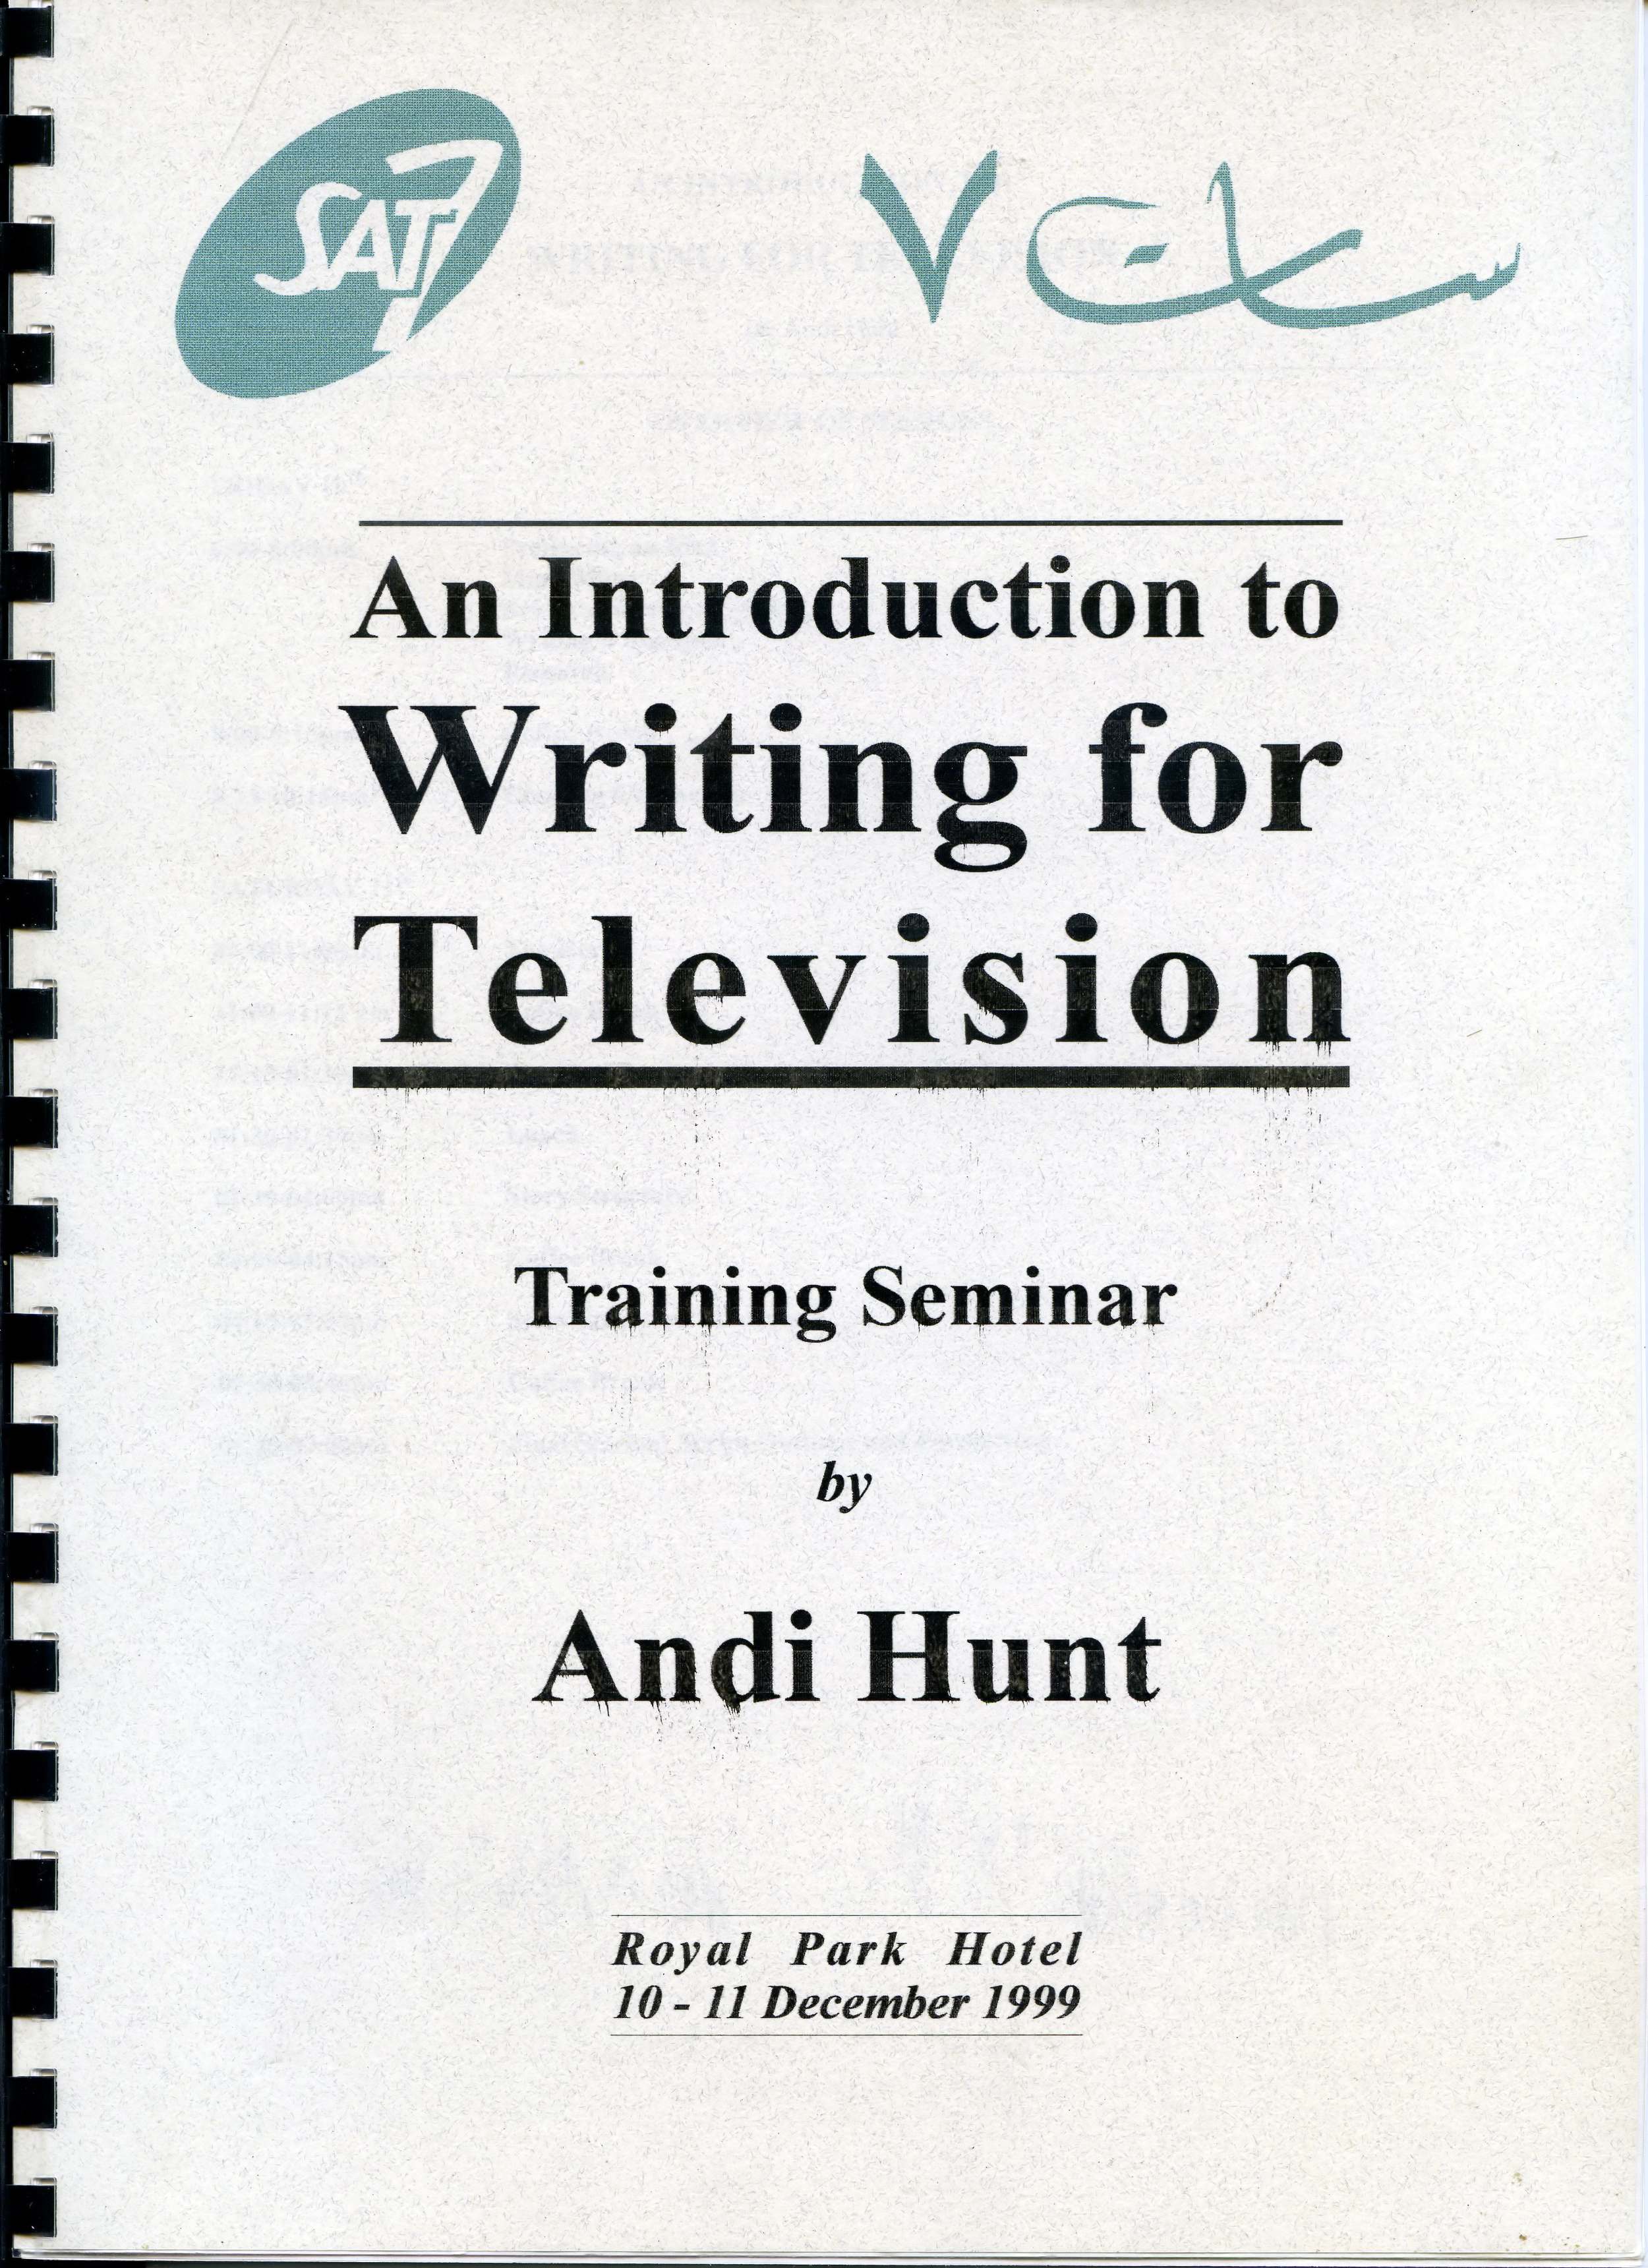 The manual for the writing seminar